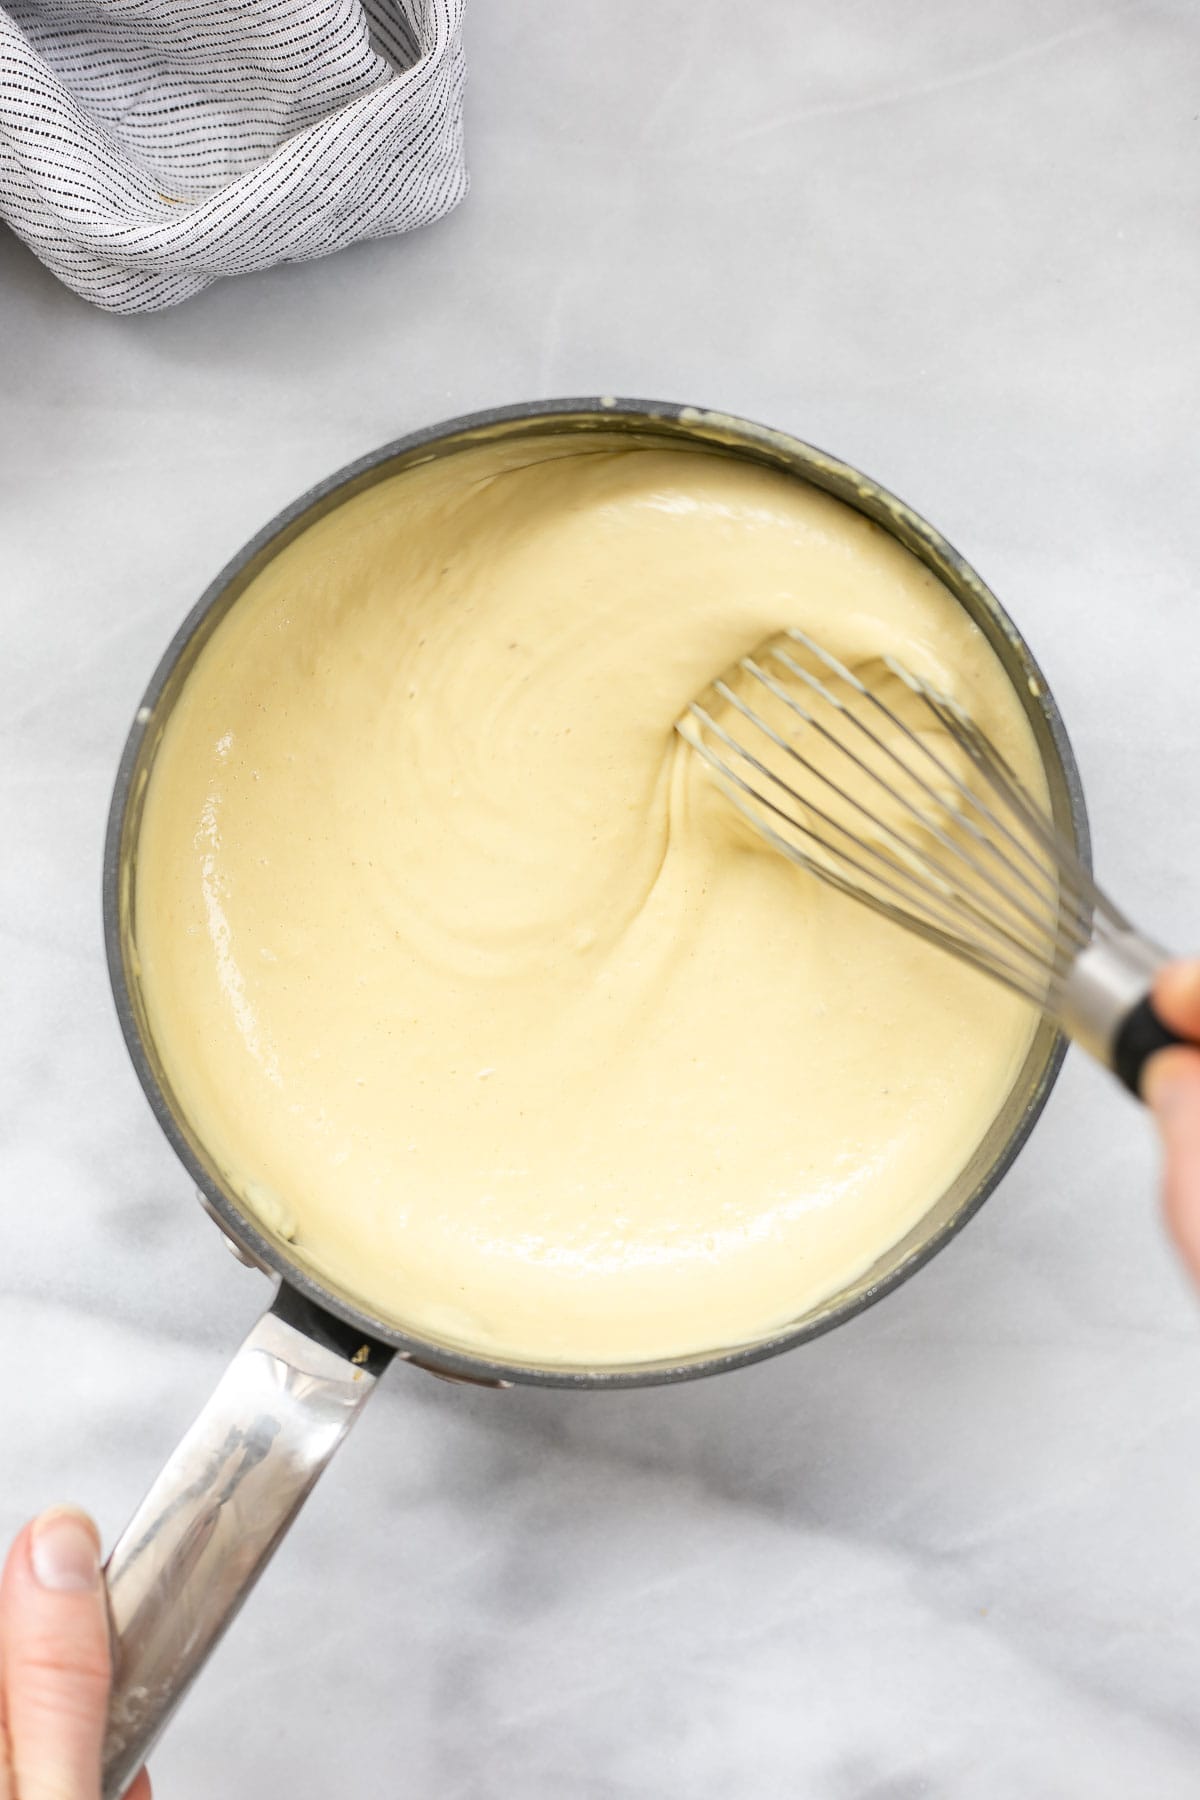 Whisking the cheese sauce.